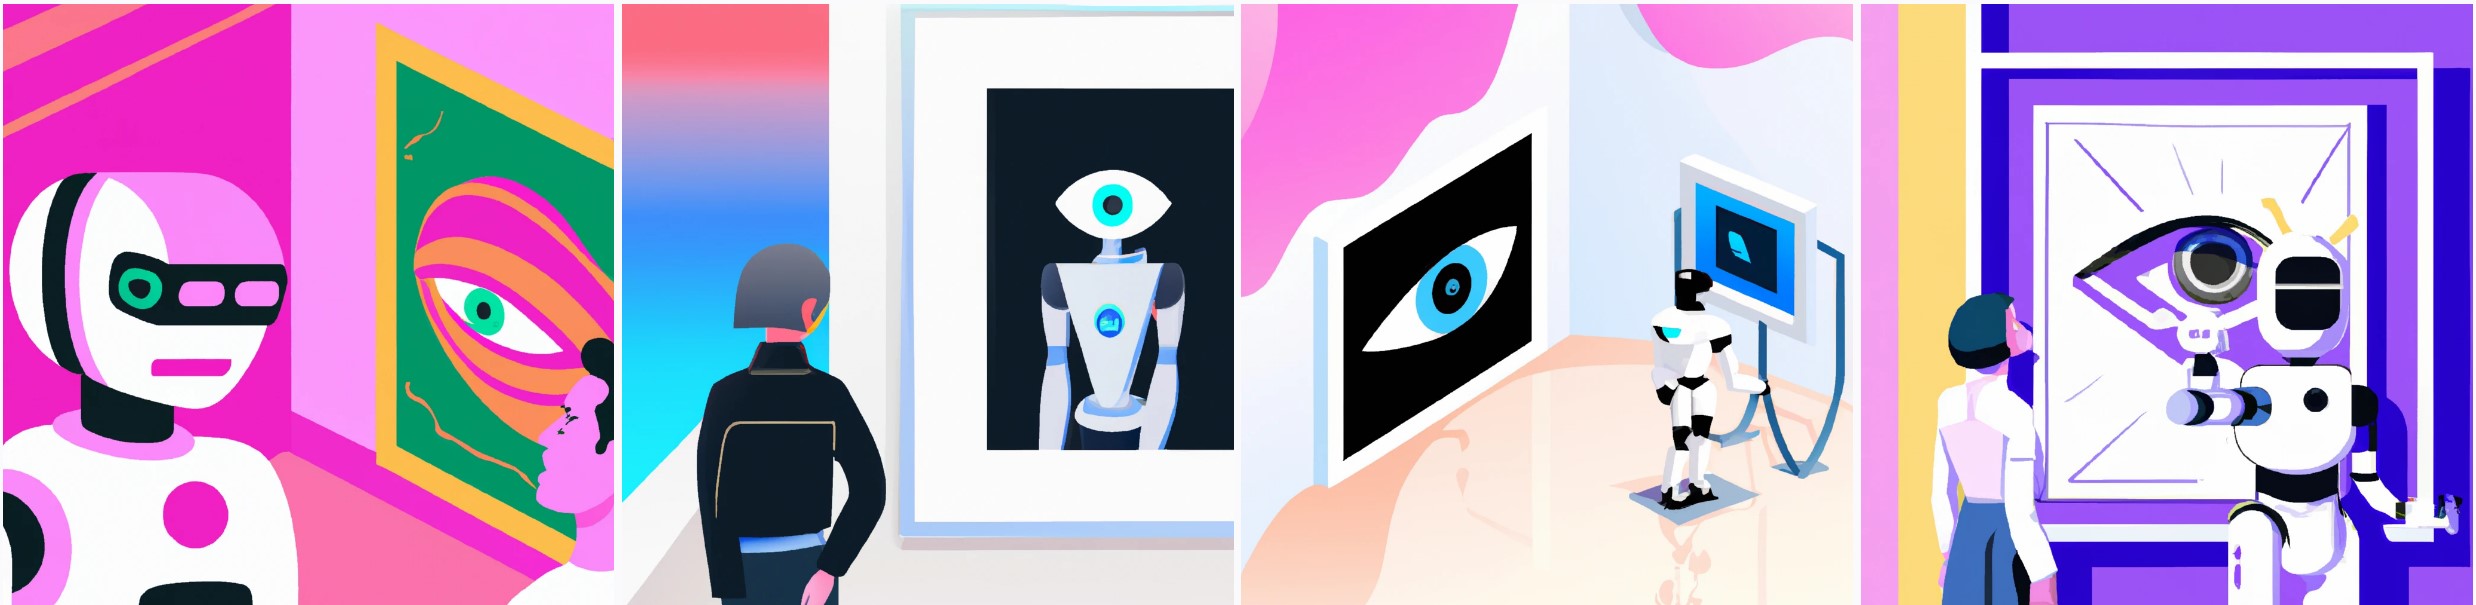 Four colorful panels of cartoons of robots and people looking at images of eyes